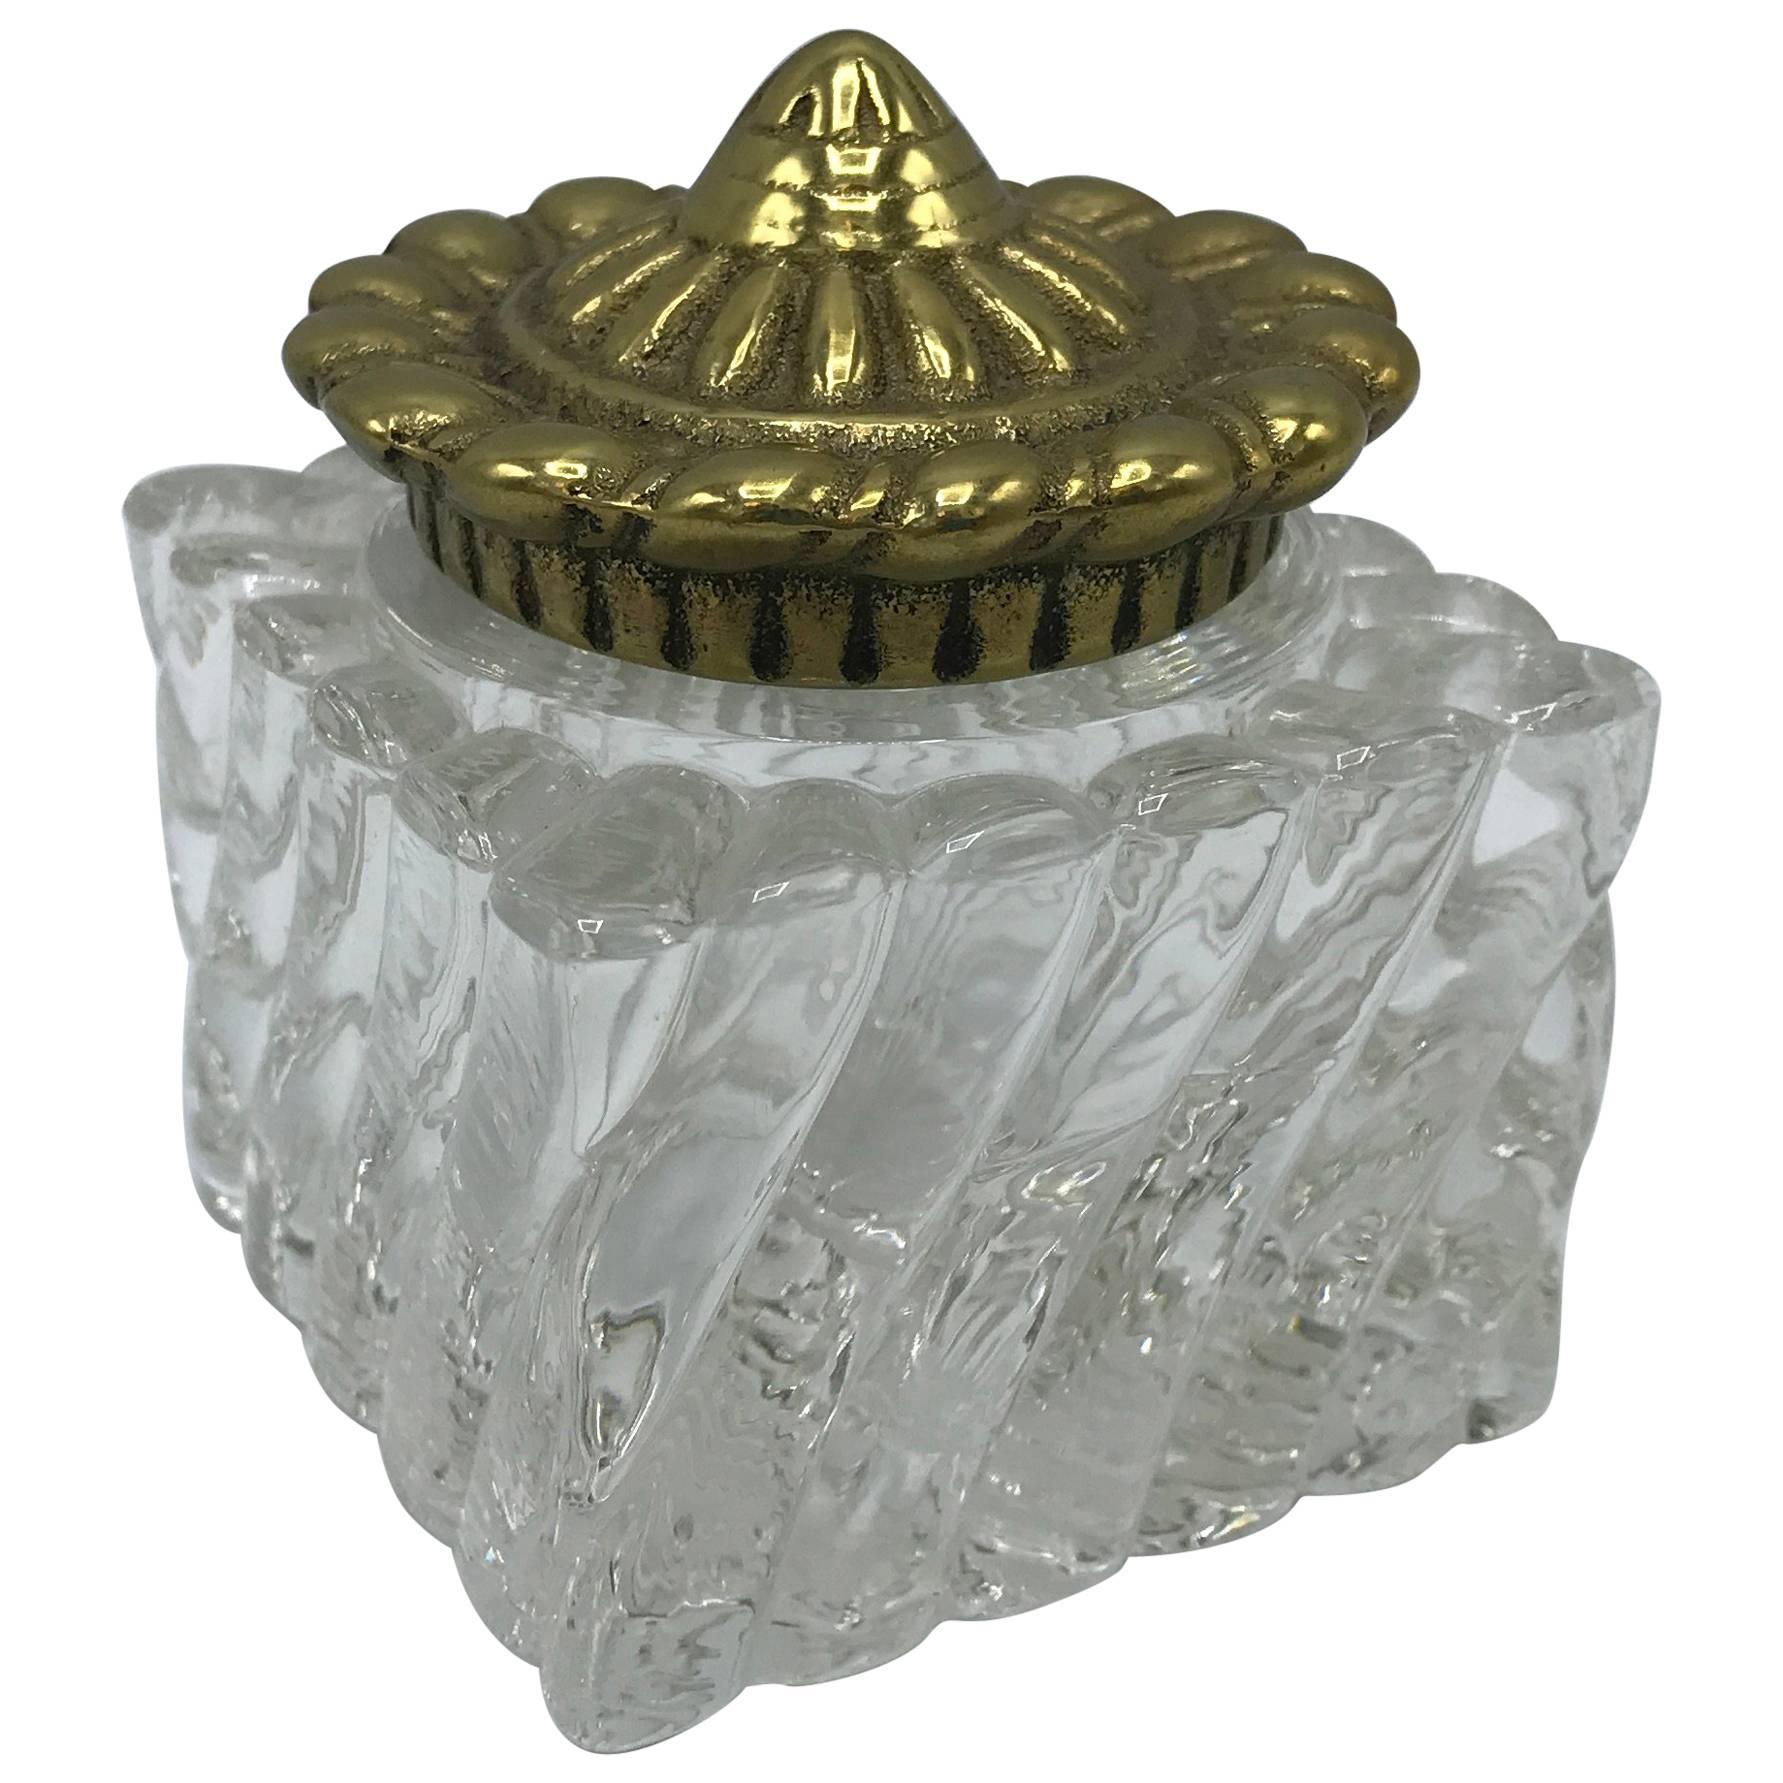 Virginia Metal Crafters Brass and Crystal Inkwell